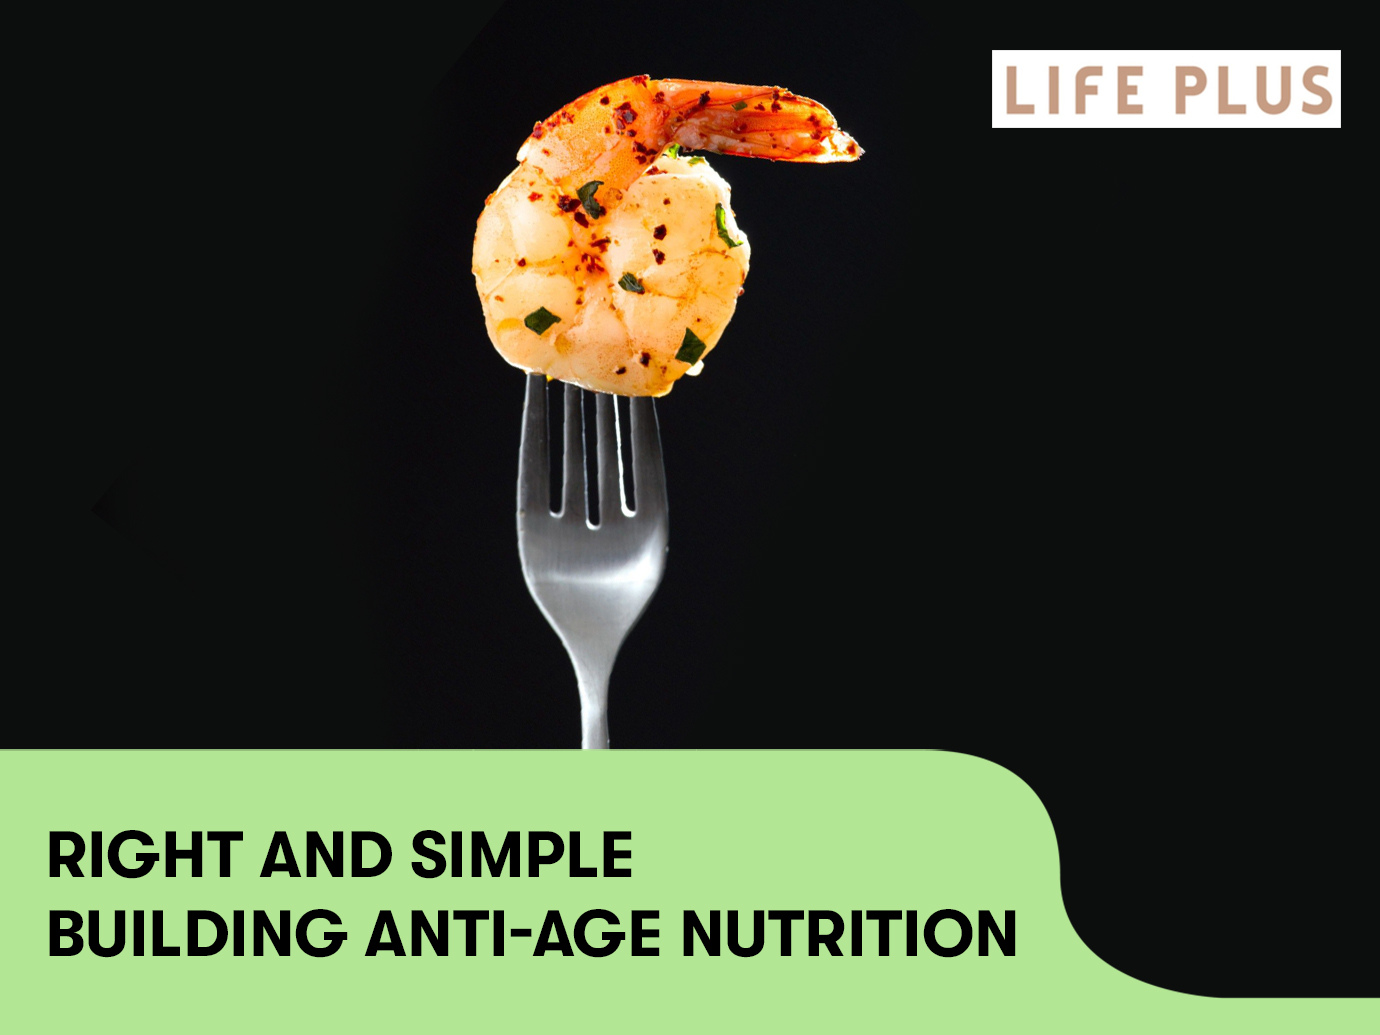 RIGHT AND SIMPLE BUILDING ANTI-AGE NUTRITION